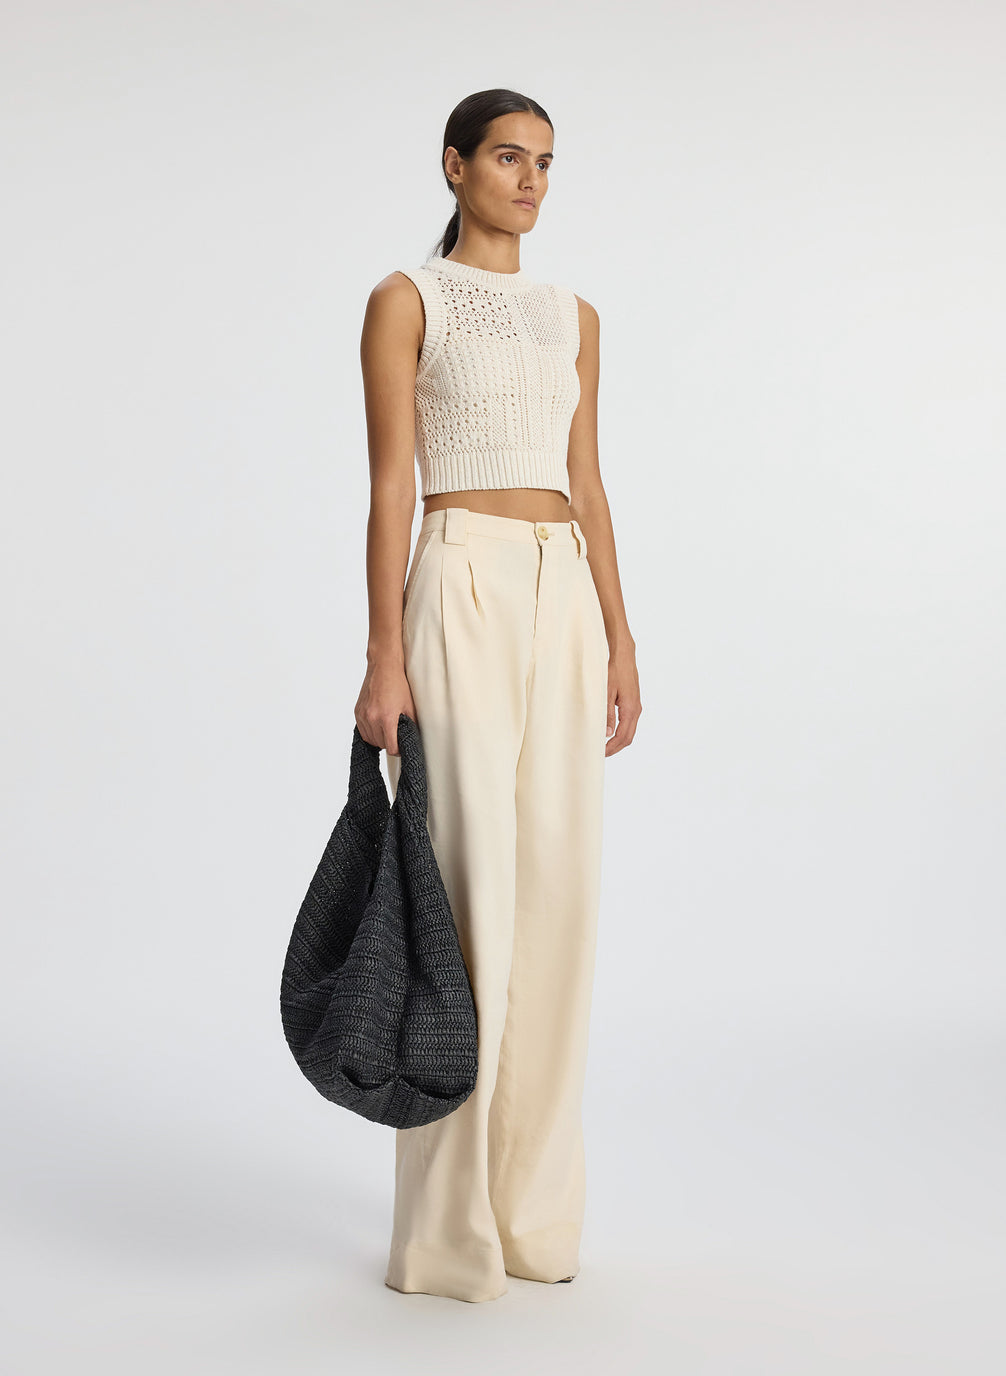 side view of woman wearing cream sleeveless cropped crochet top and beige pants